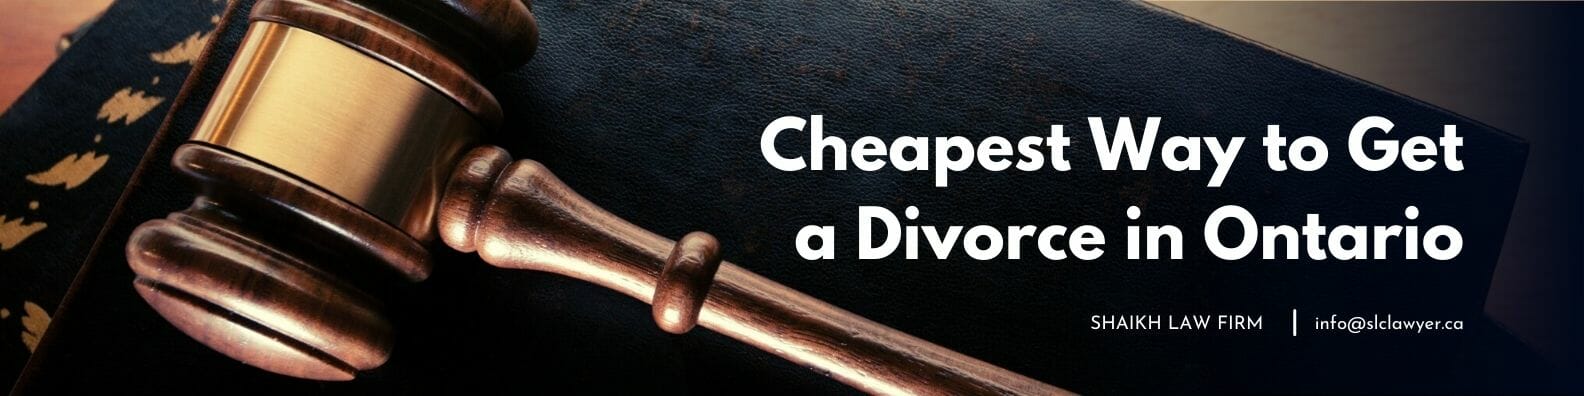 Cheapest Way to Get a Divorce in Ontario